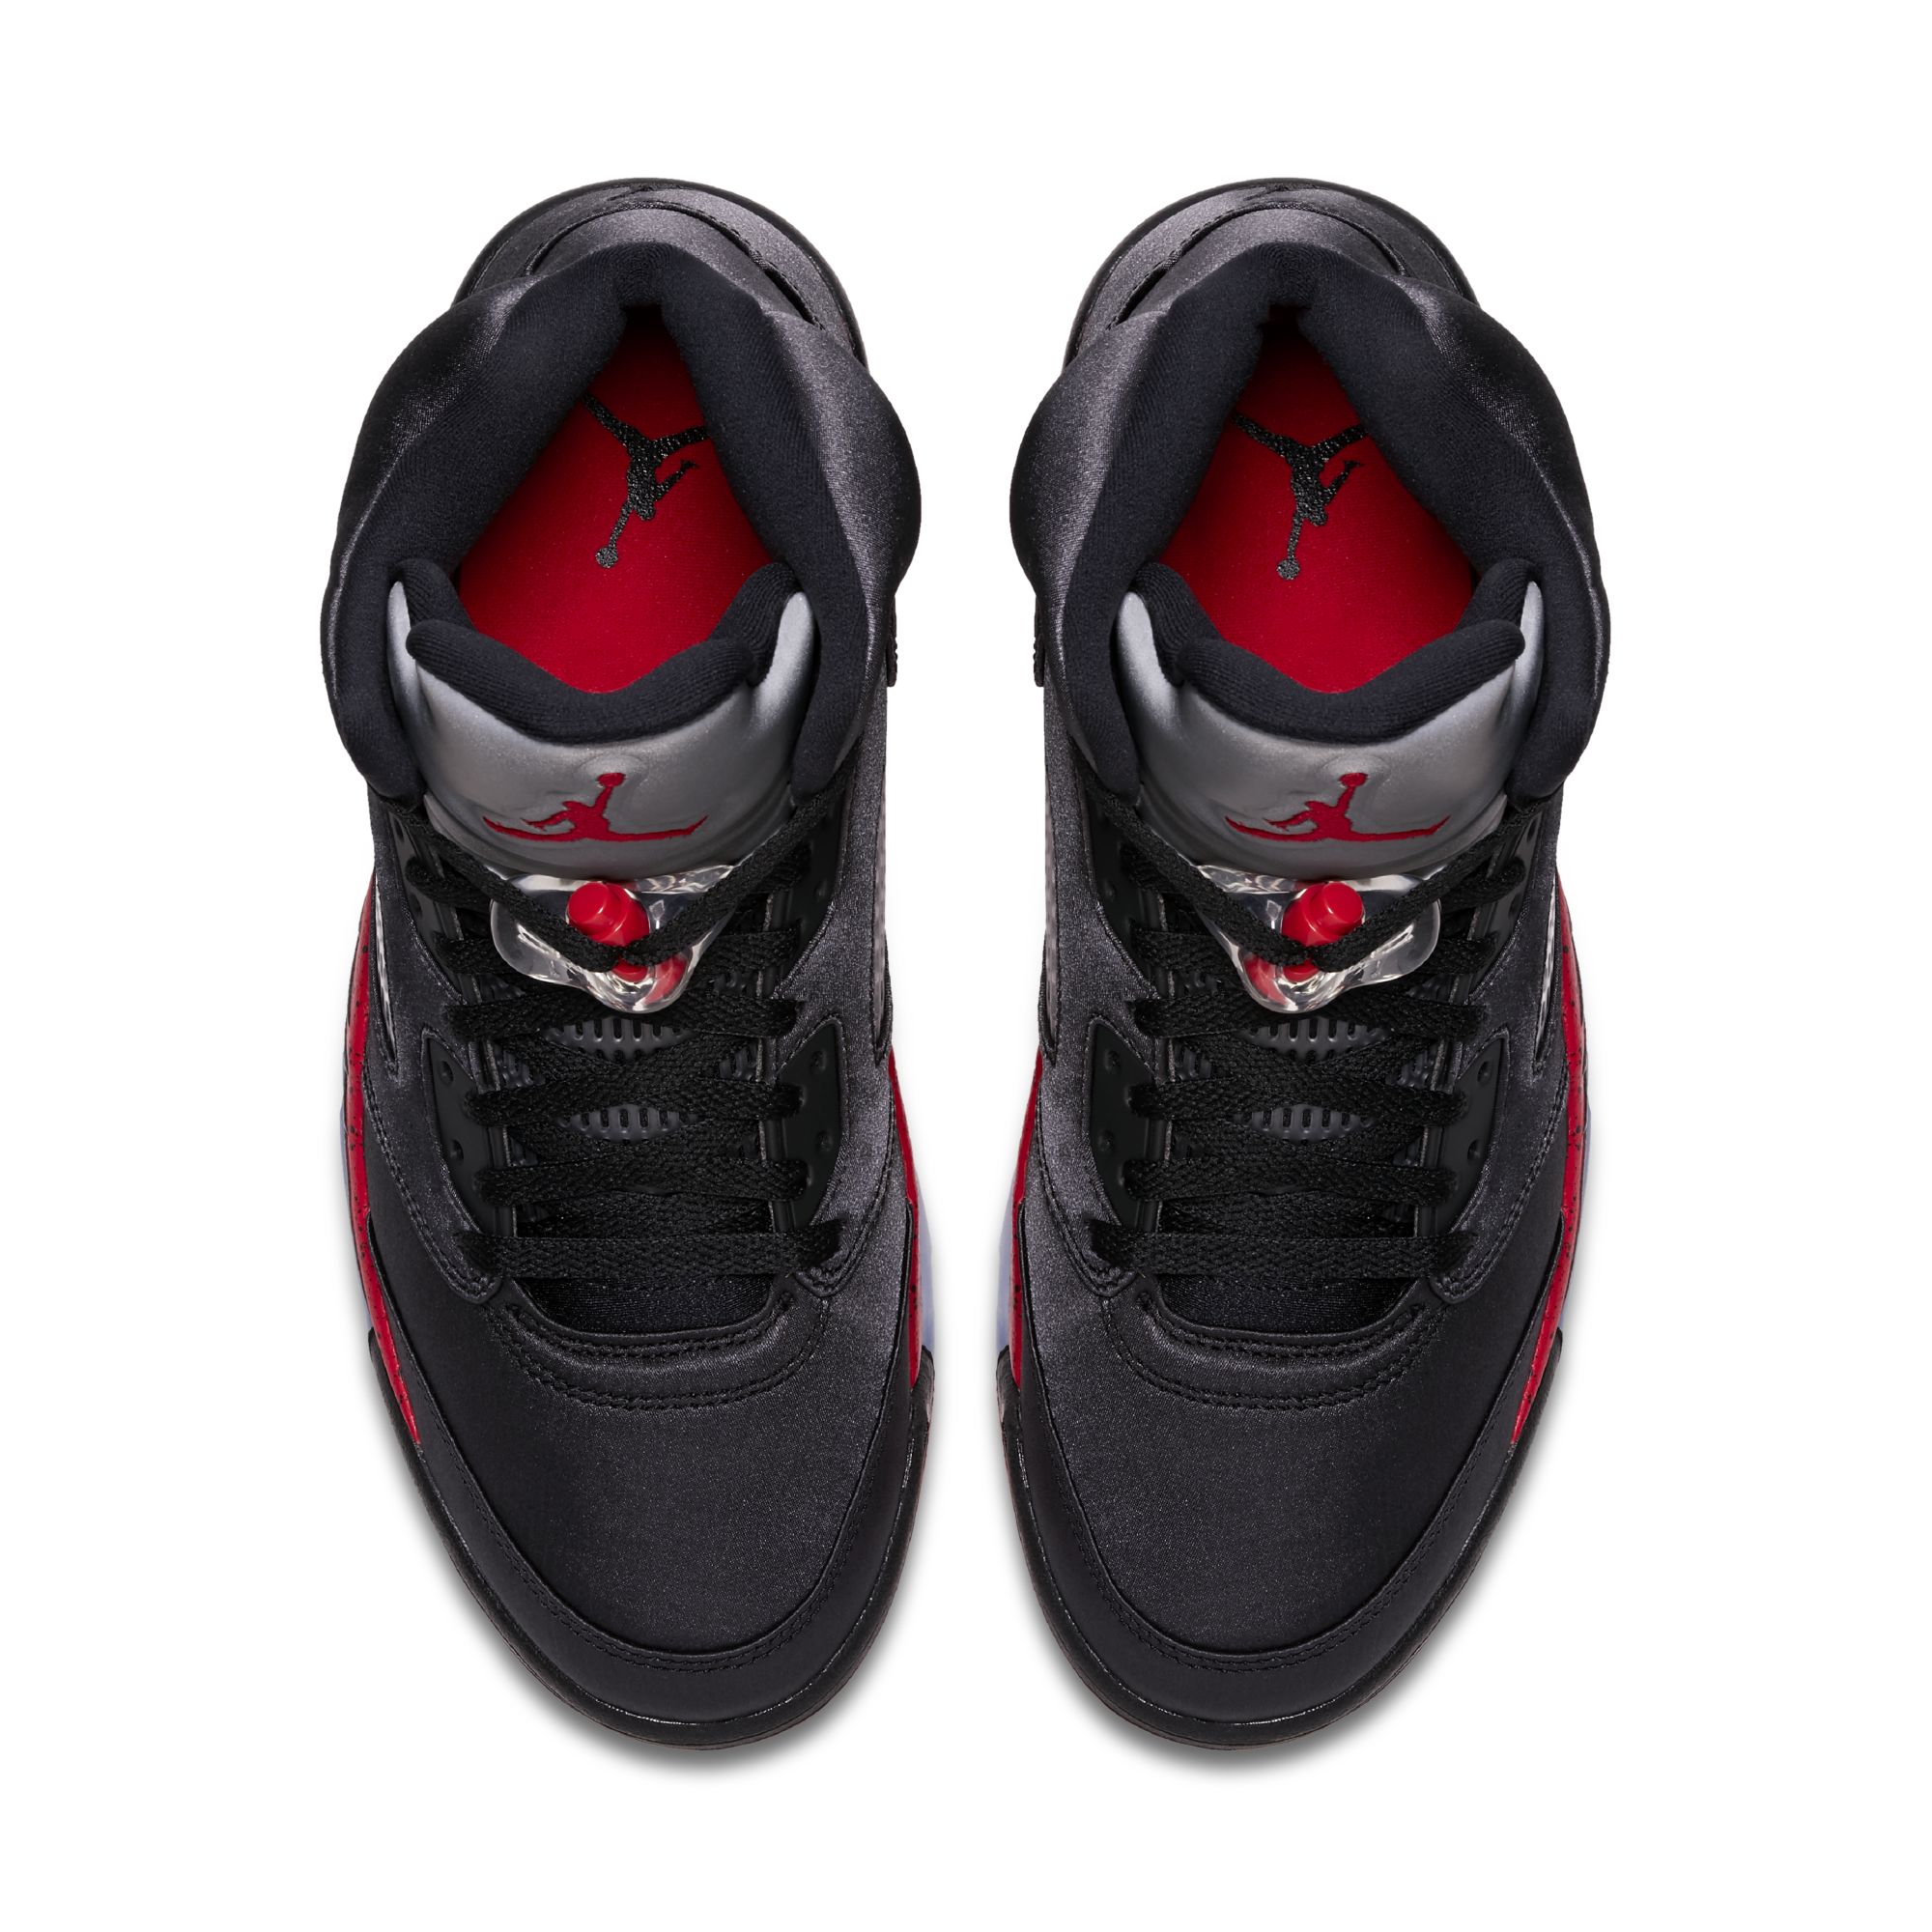 Official Look at the Satin Air Jordan 5 'Black/Red' - WearTesters